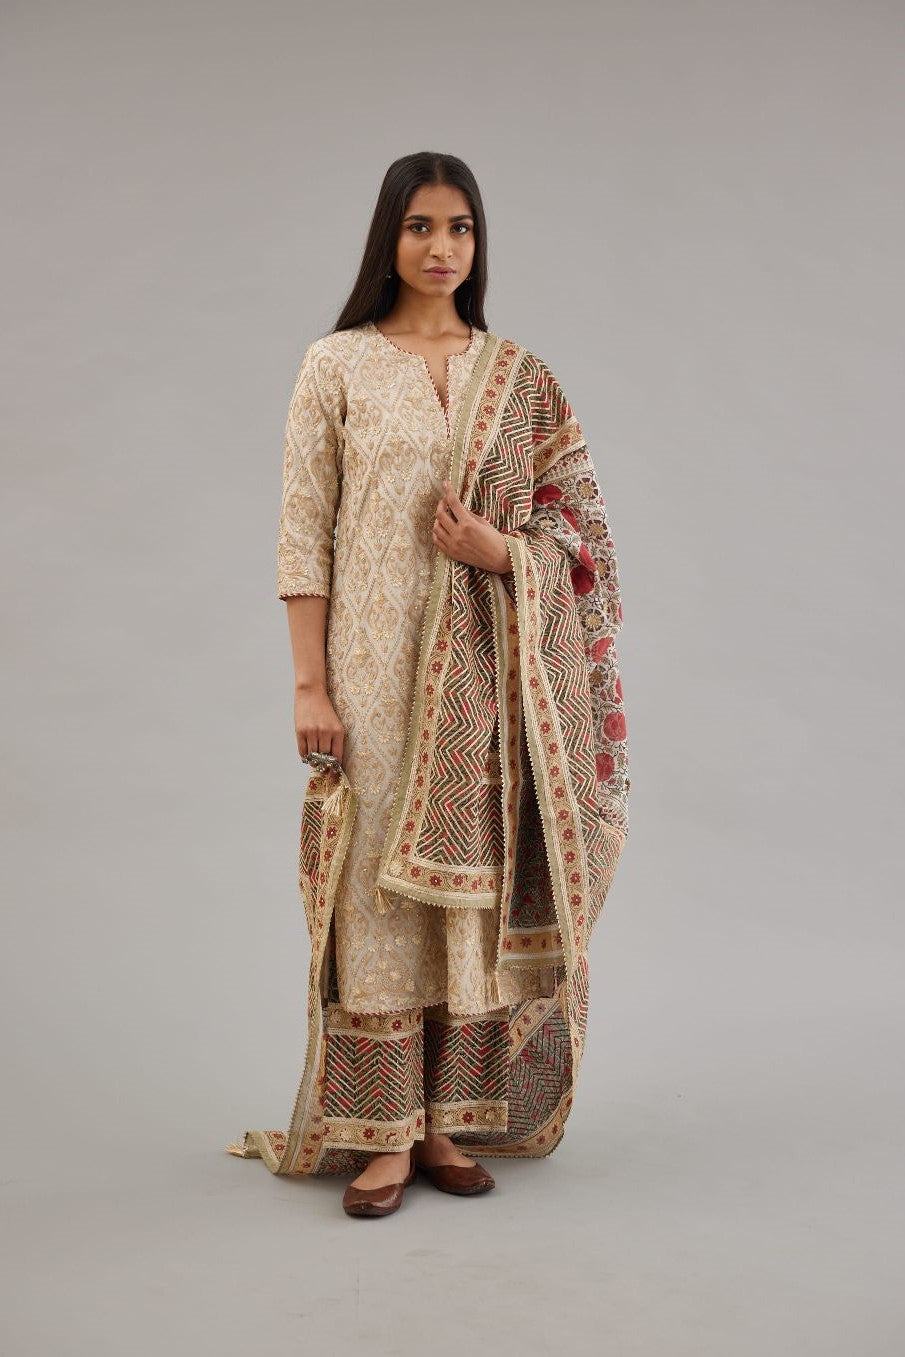 Off white cotton chanderi straight kurta set with all-over dori and gota embroidery, highlighted with gold sequin work.